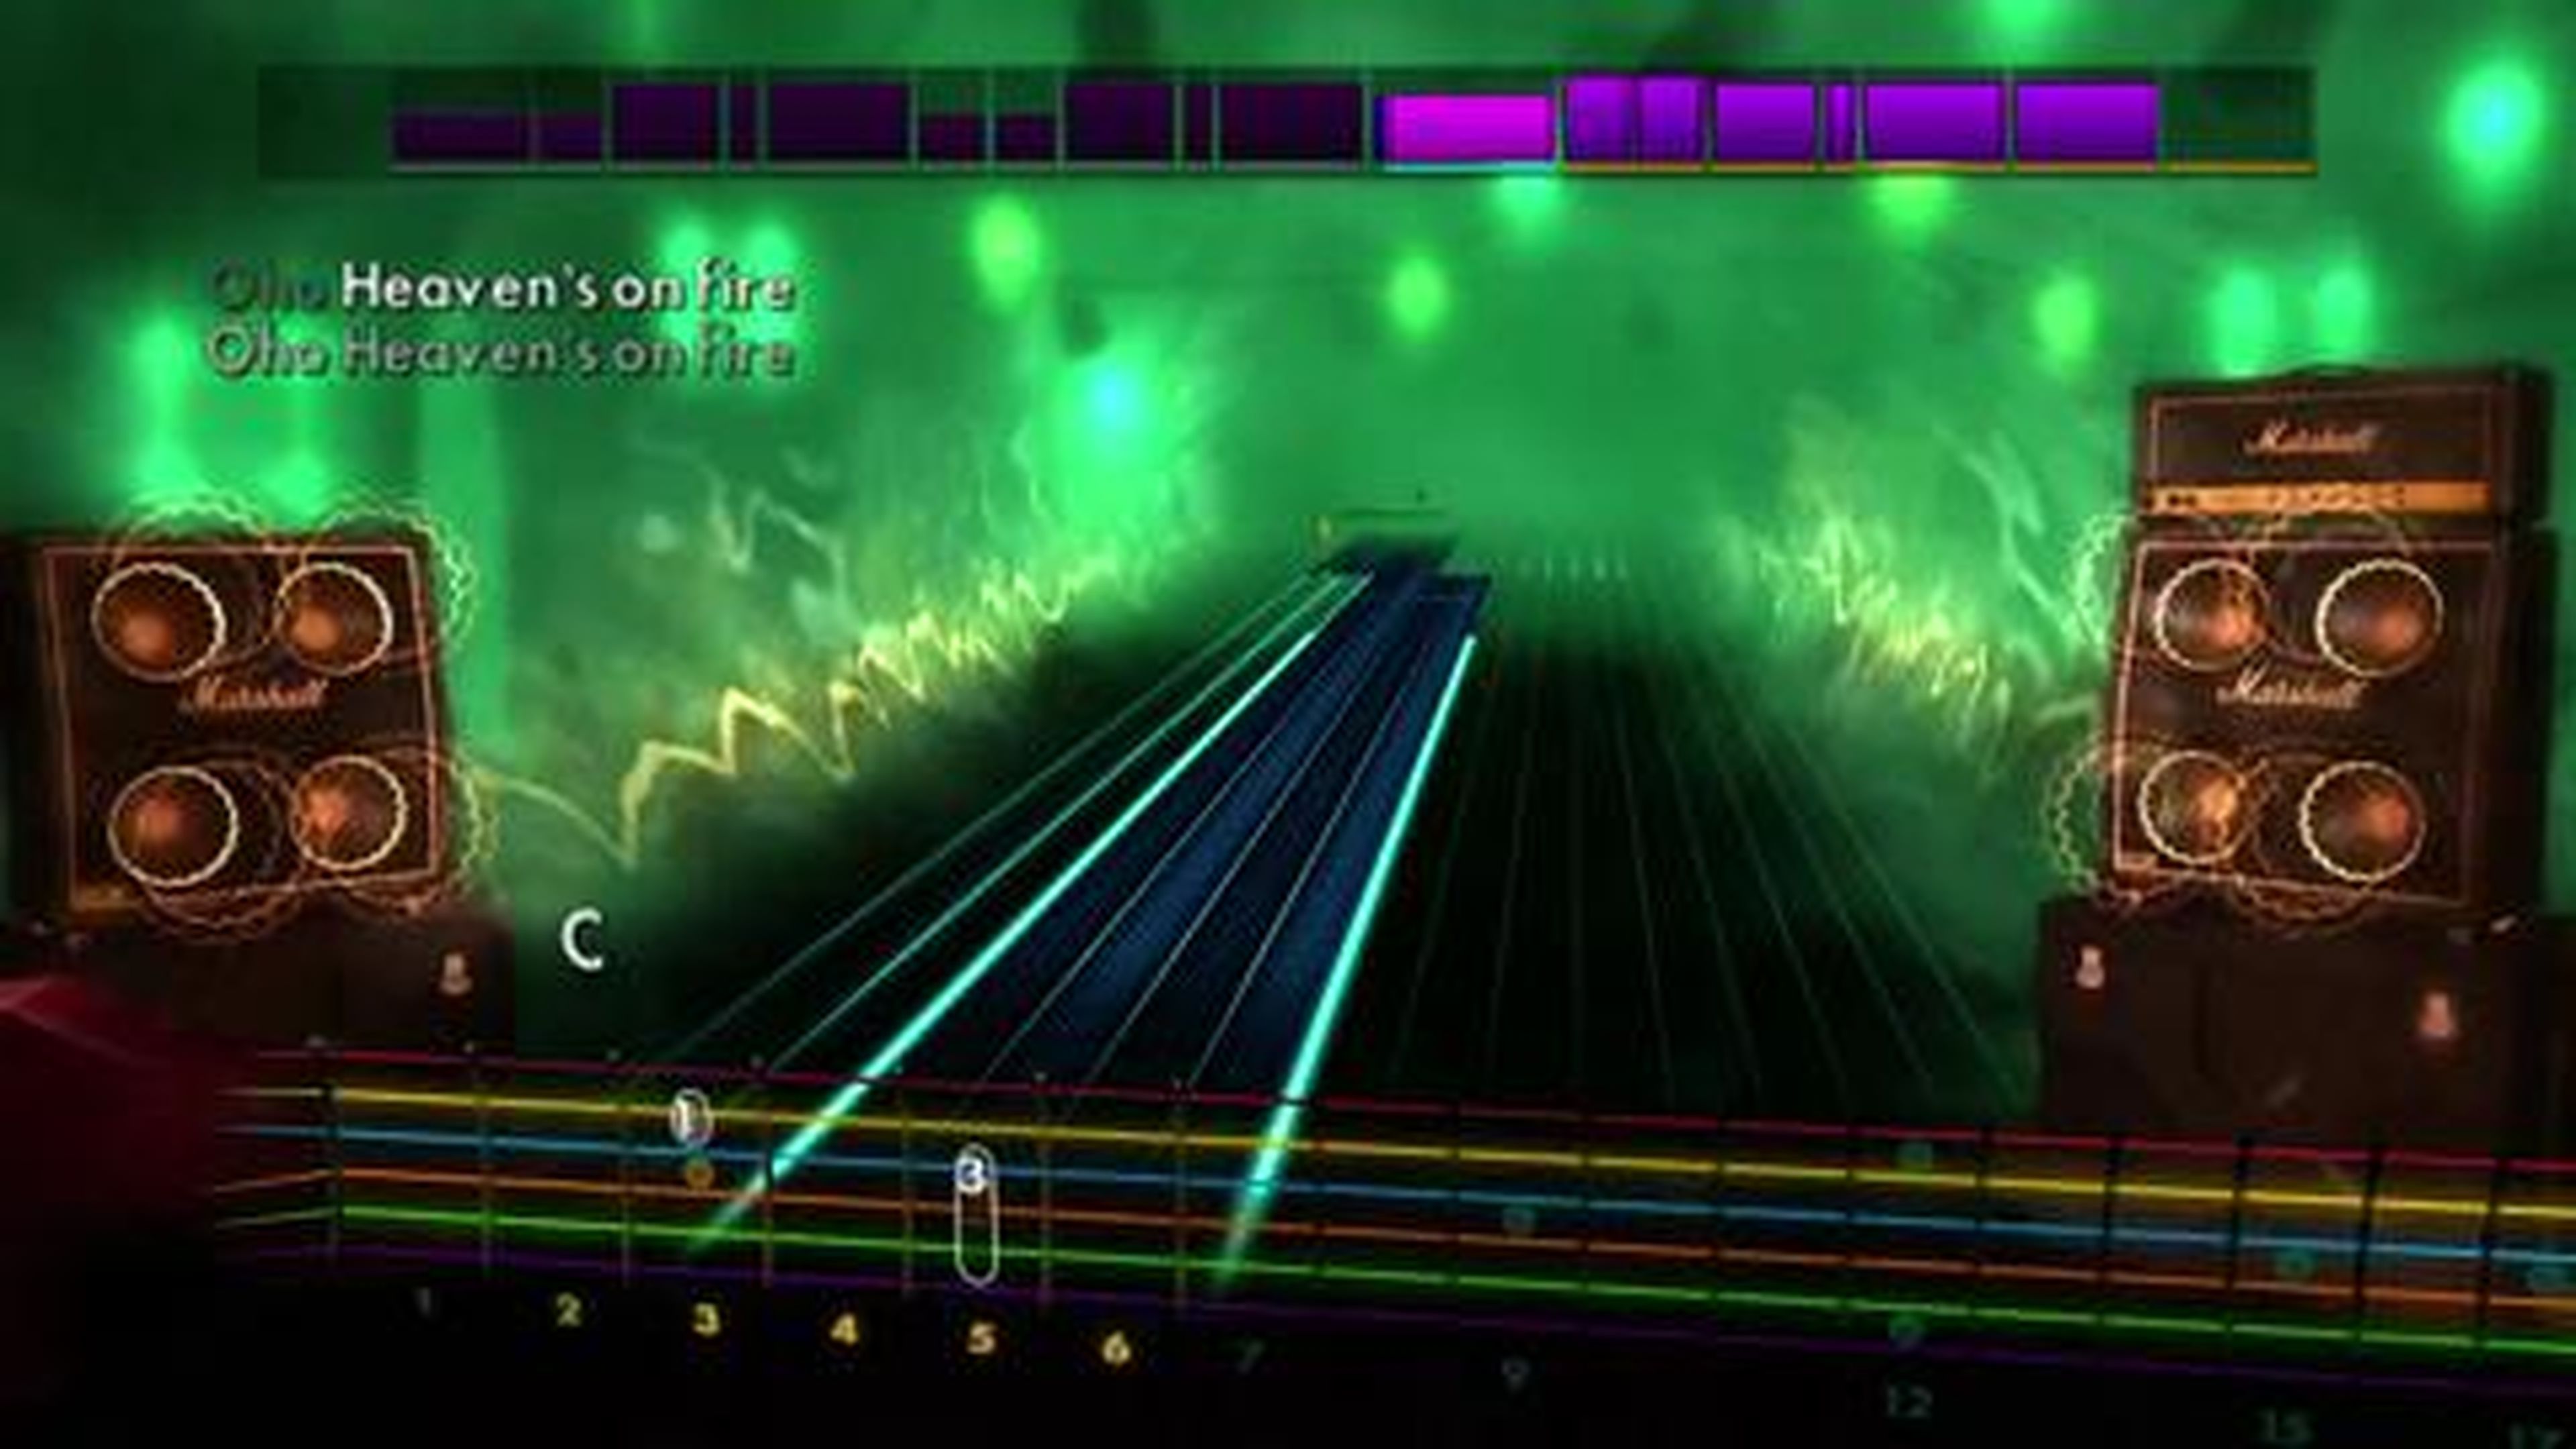 Rocksmith 2014 Edition - KISS songs pack Trailer [Europe]